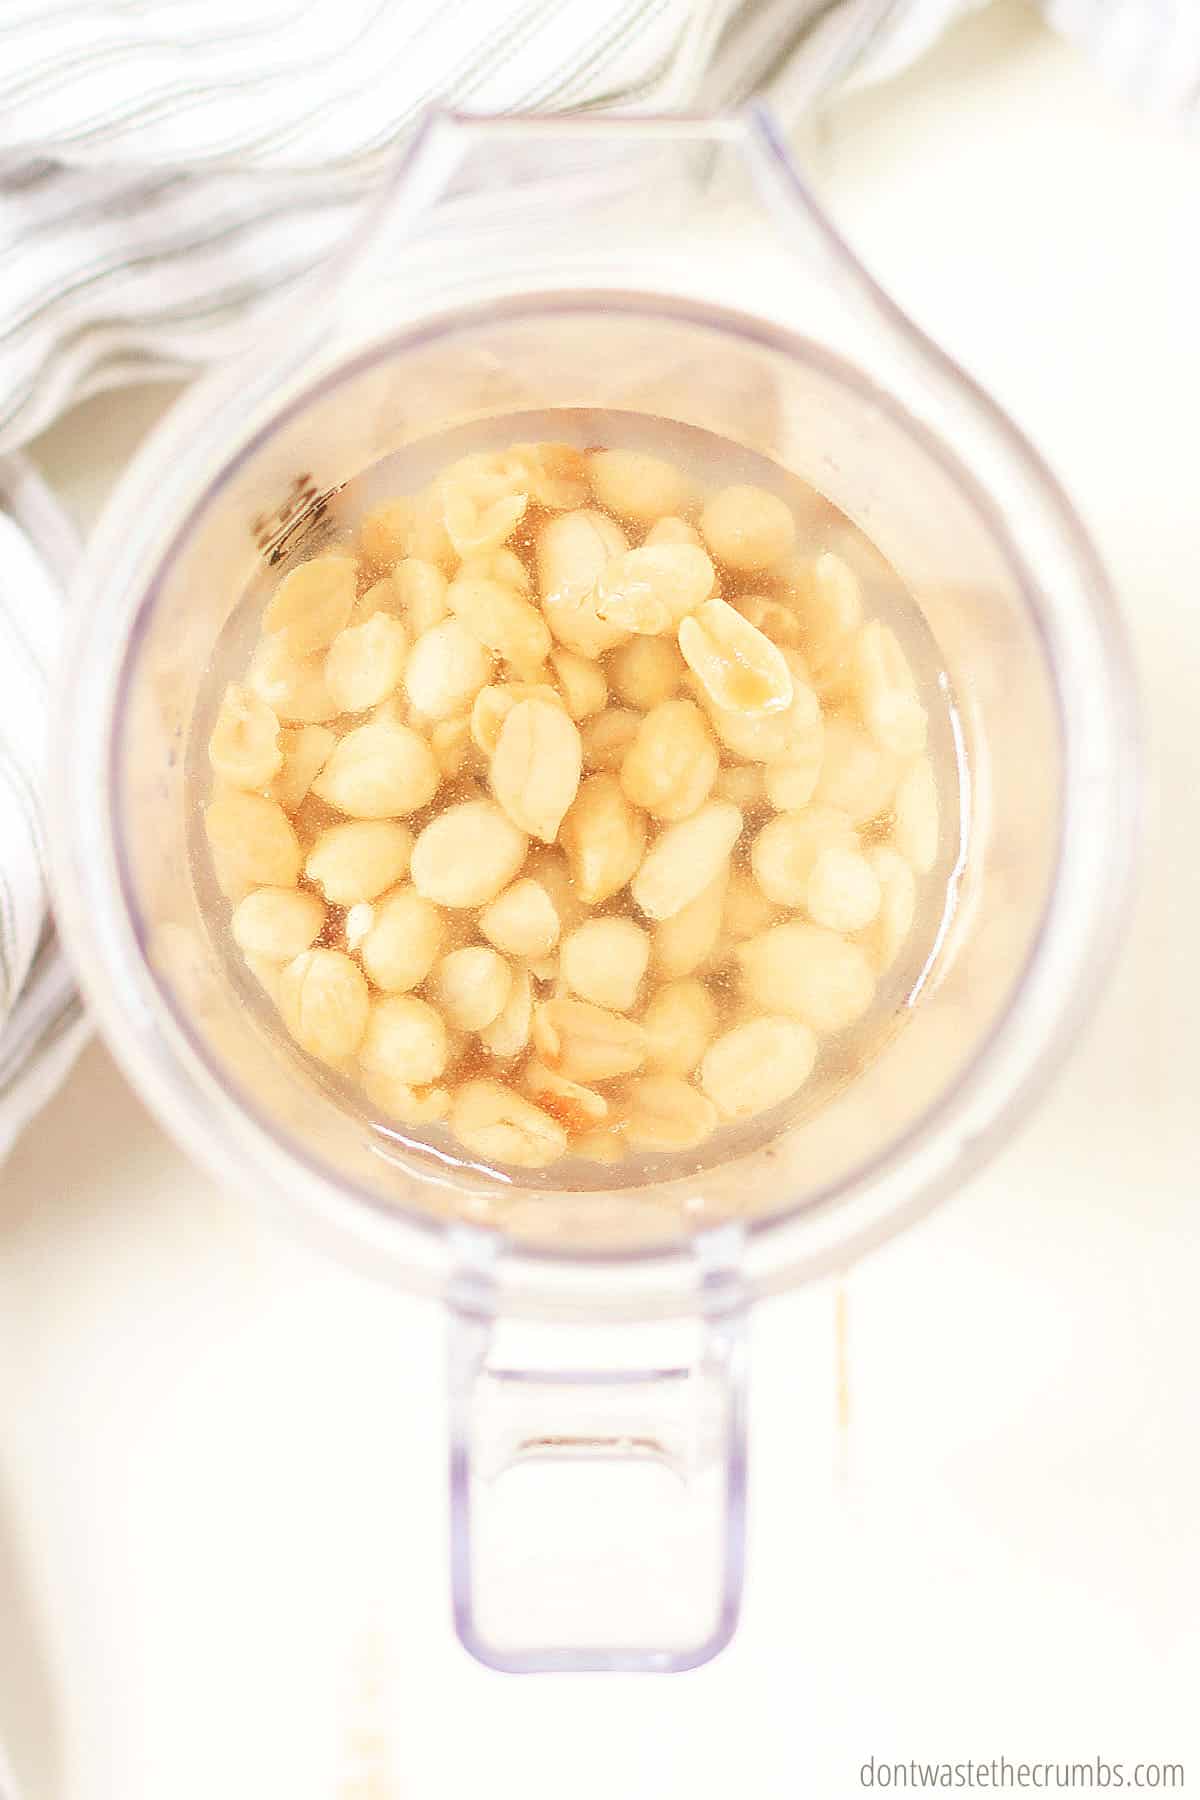 To make peanut milk, put your soaked peanuts into a blender with water.